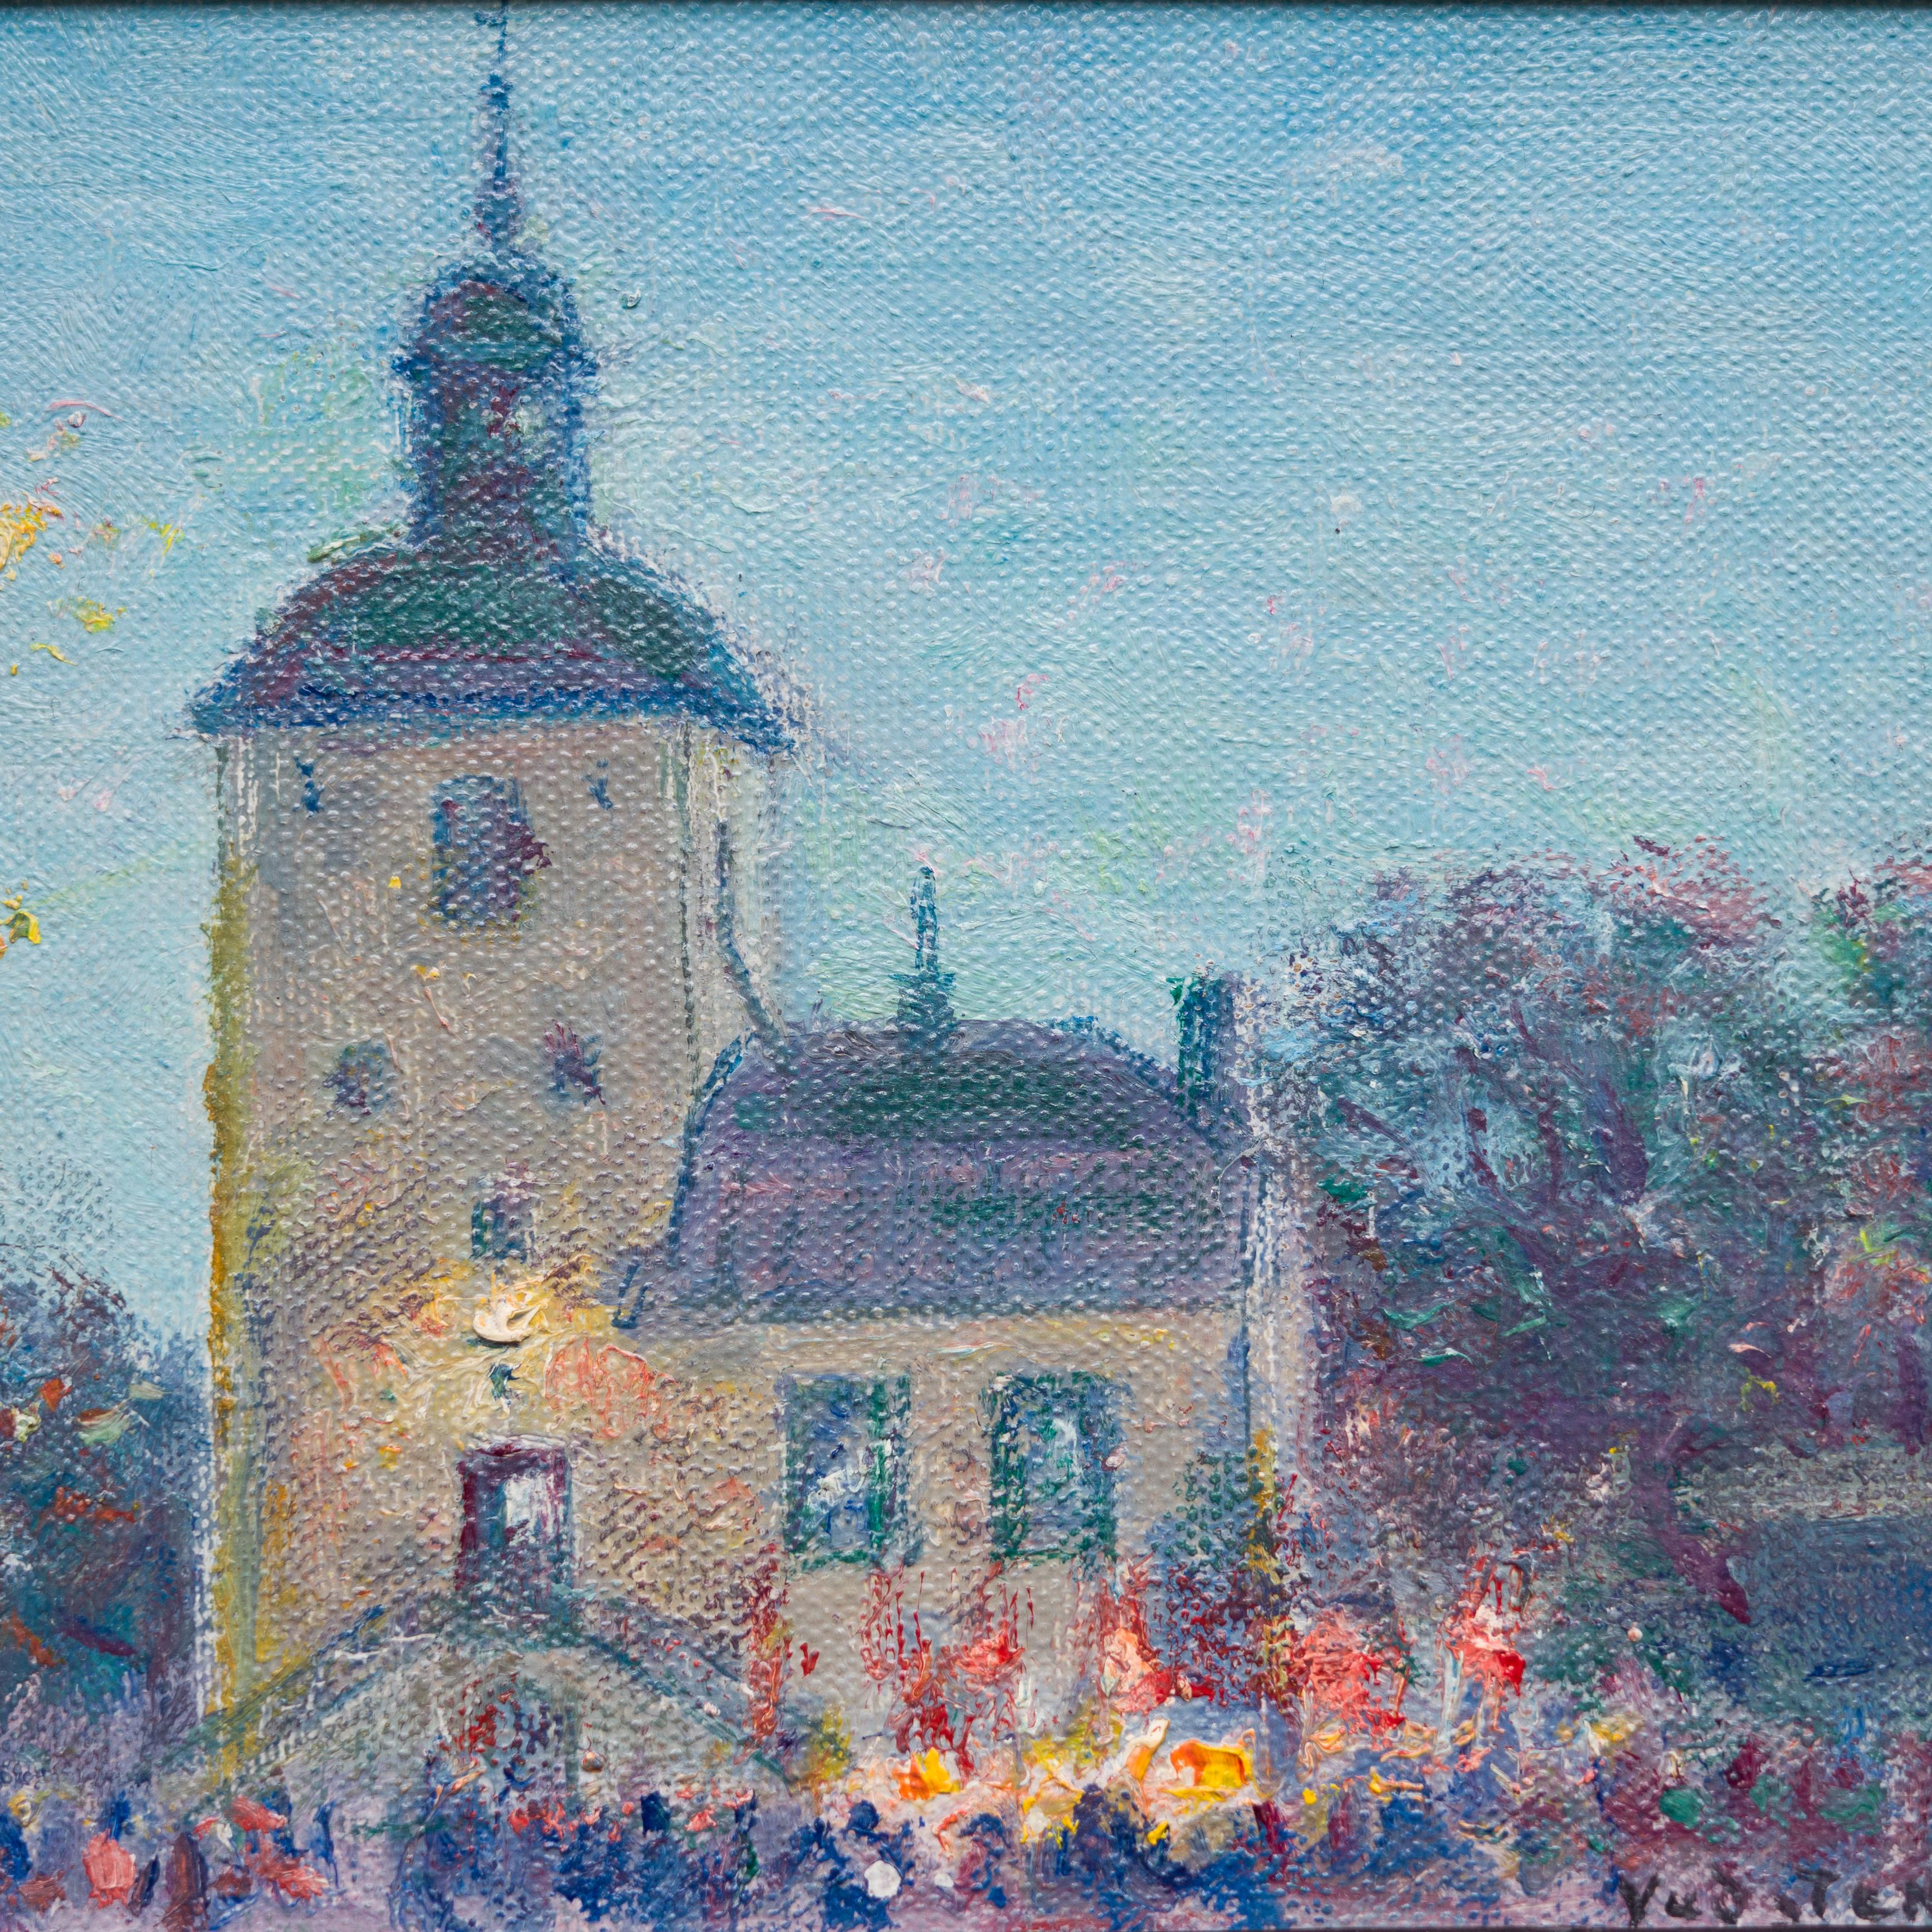 Vadstena Town Hall, 1954 - Painting by Erik Tryggelin